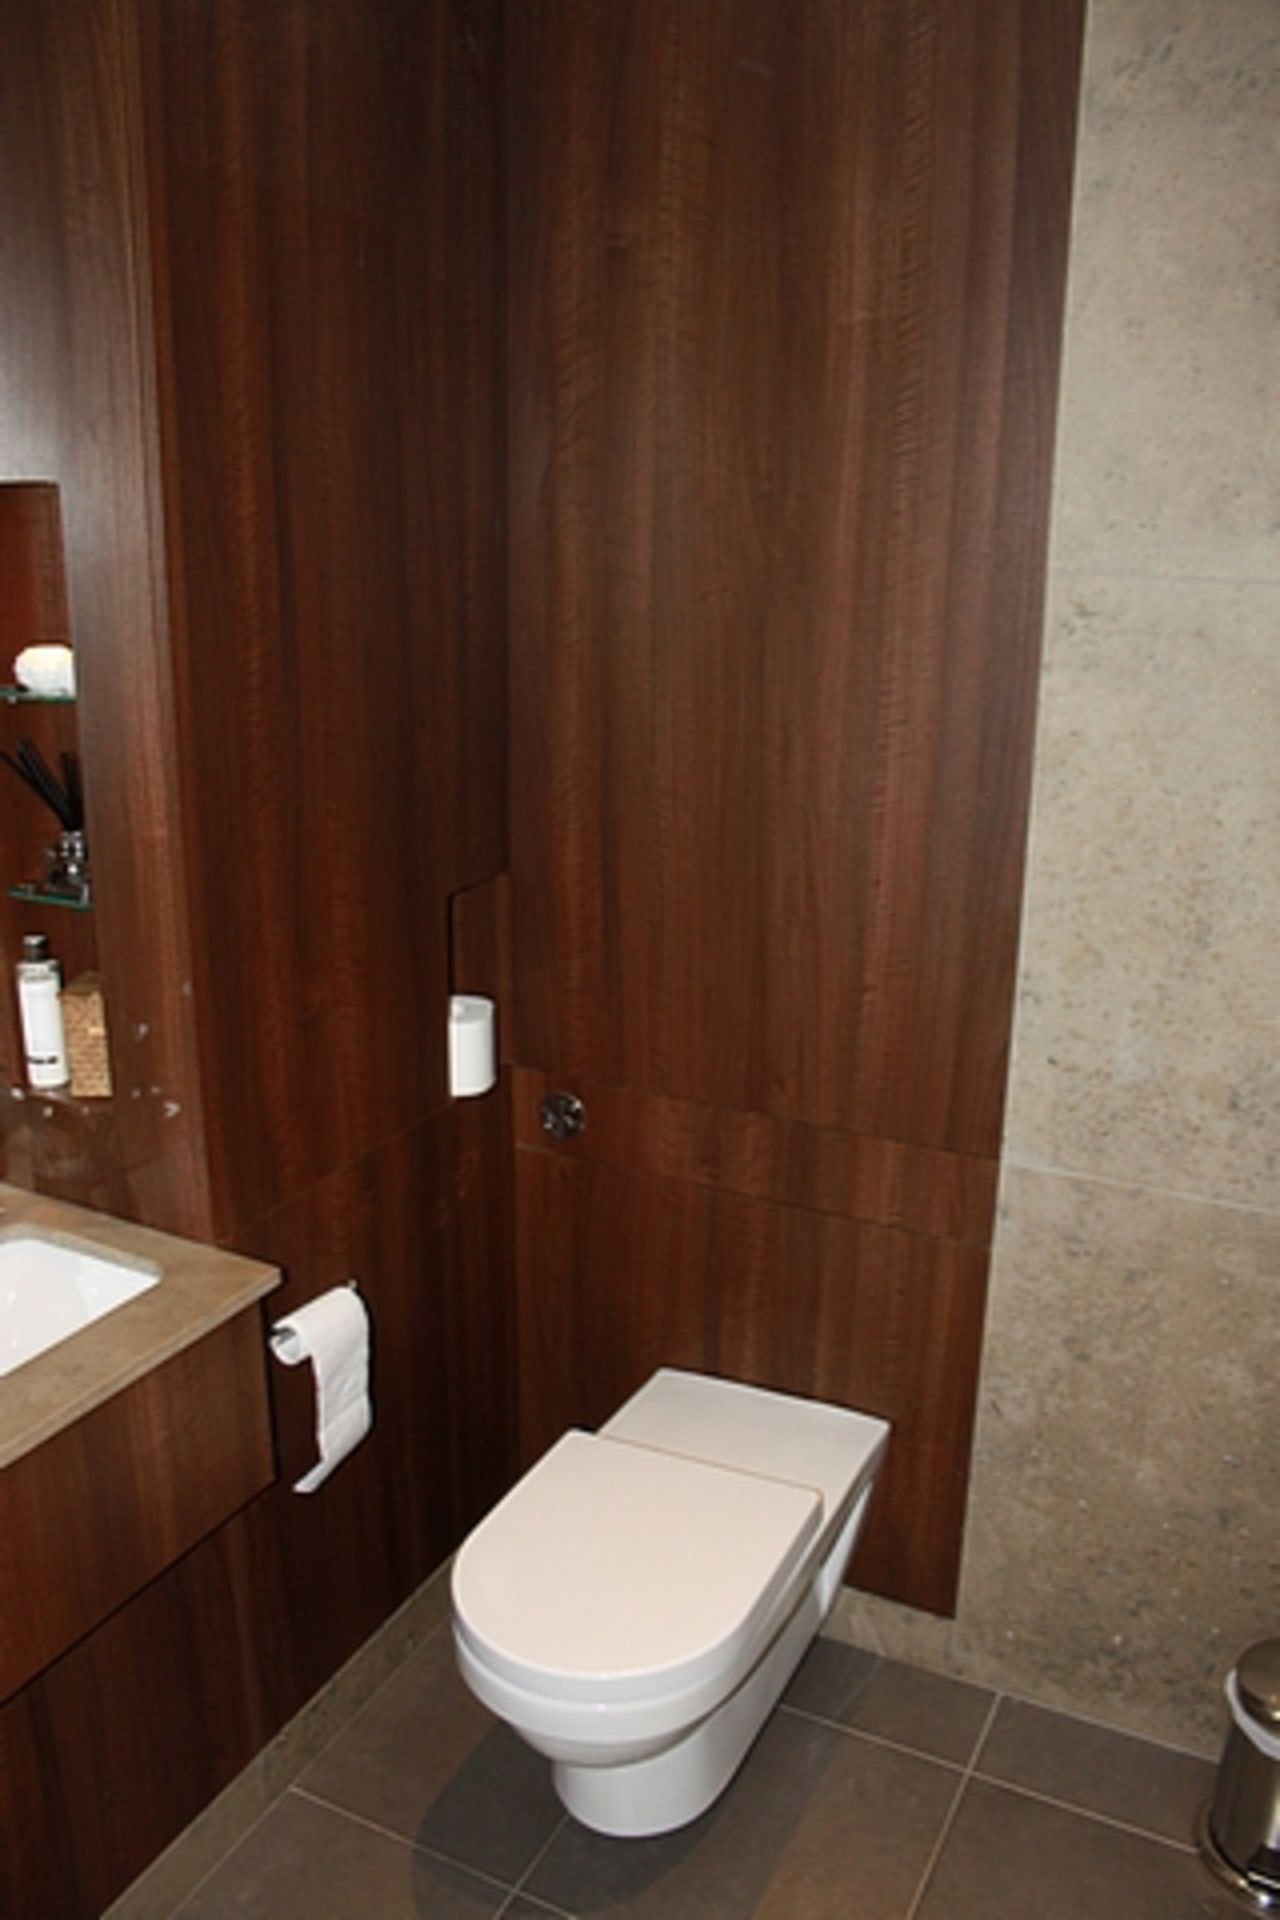 A Villeroy & Boch cloakroom comprising of stone basin and vanity and WC pan 1900mm x 2100mm - Image 4 of 4